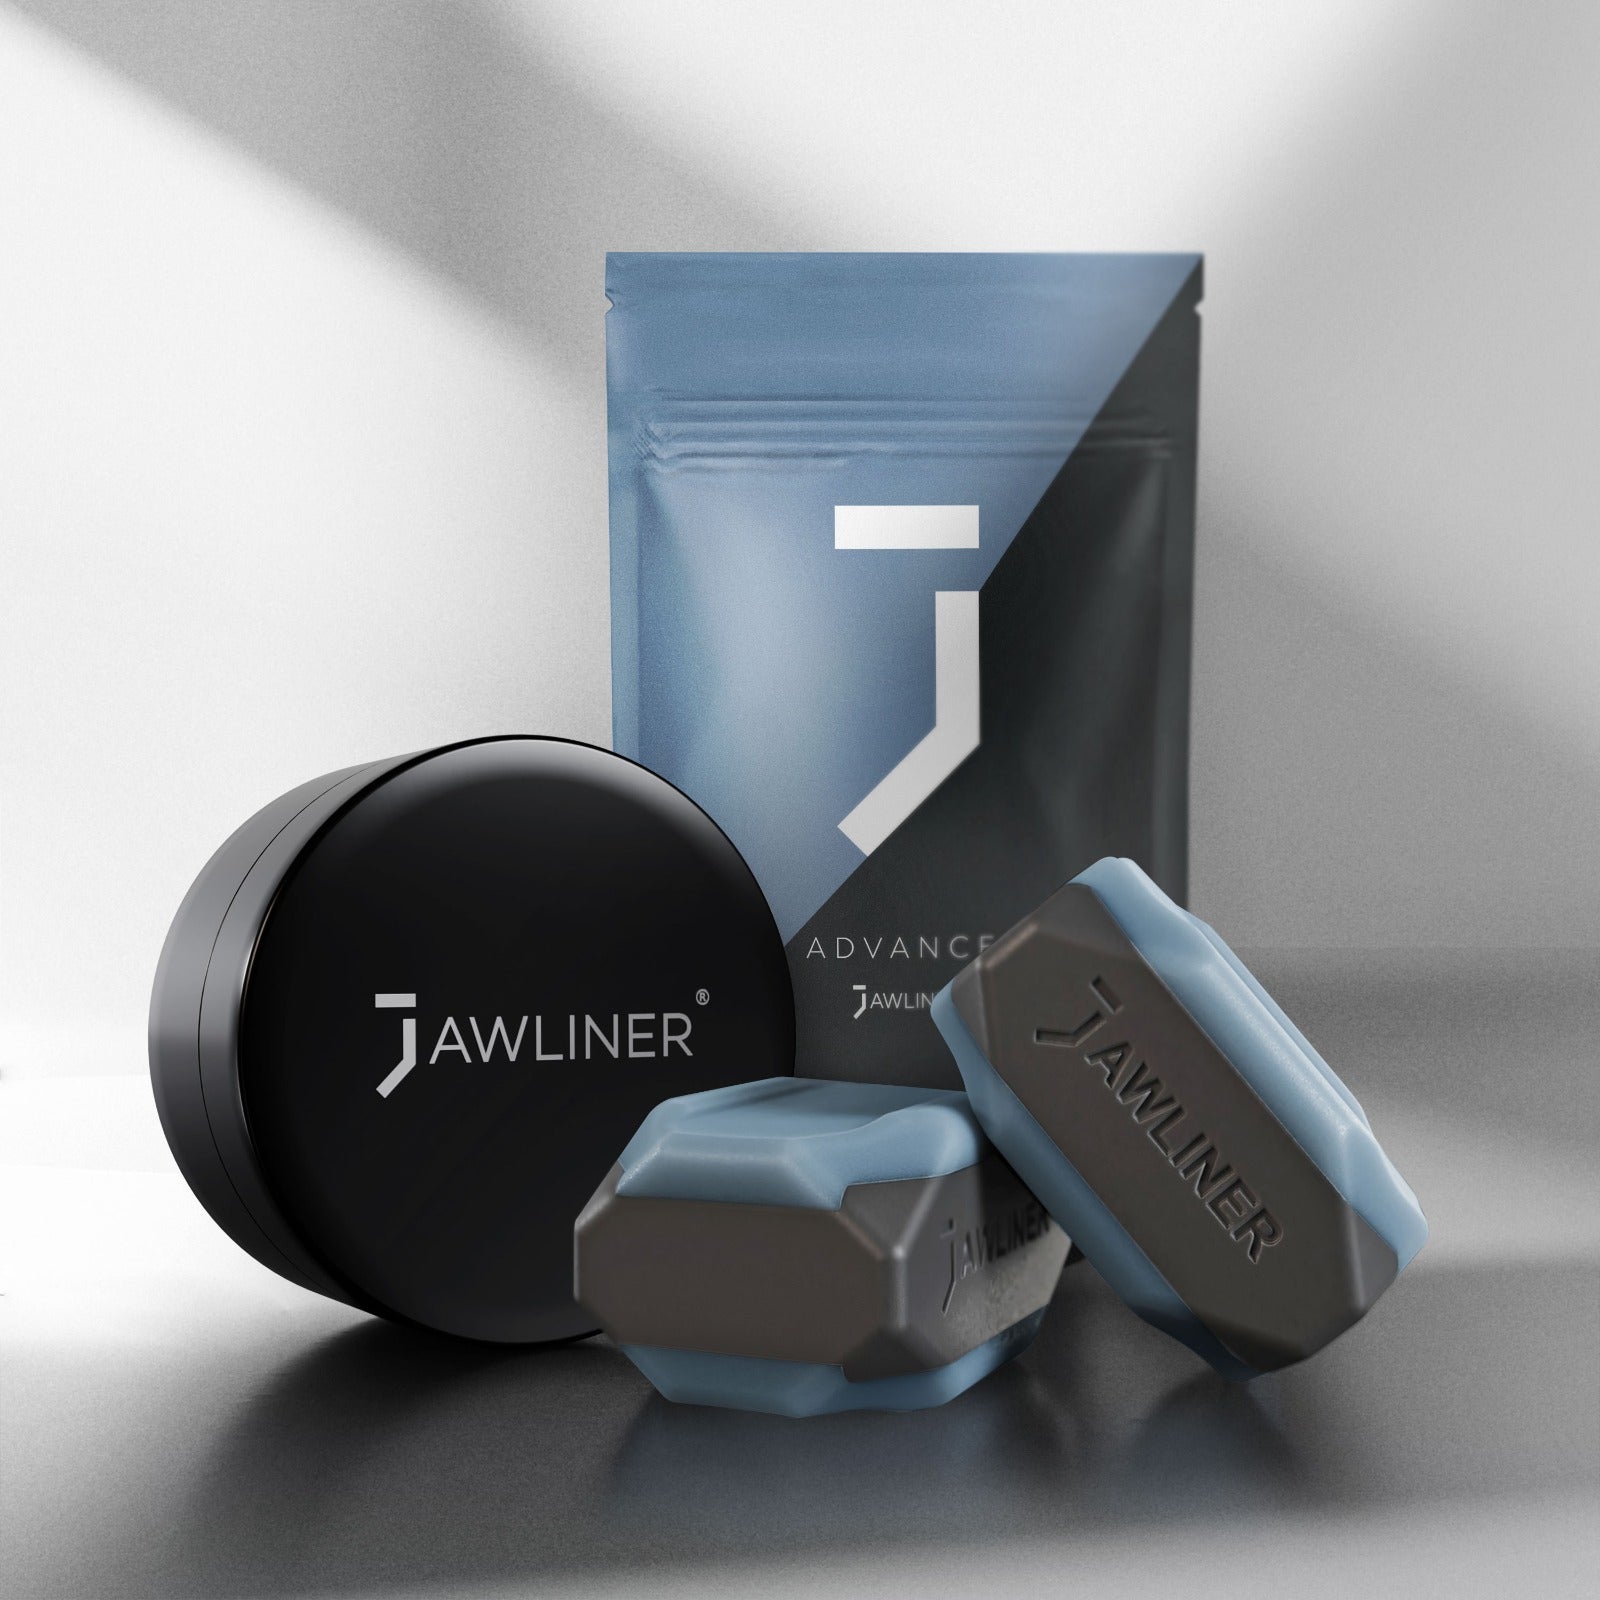 The Jawline Trainer Advanced – GLWP